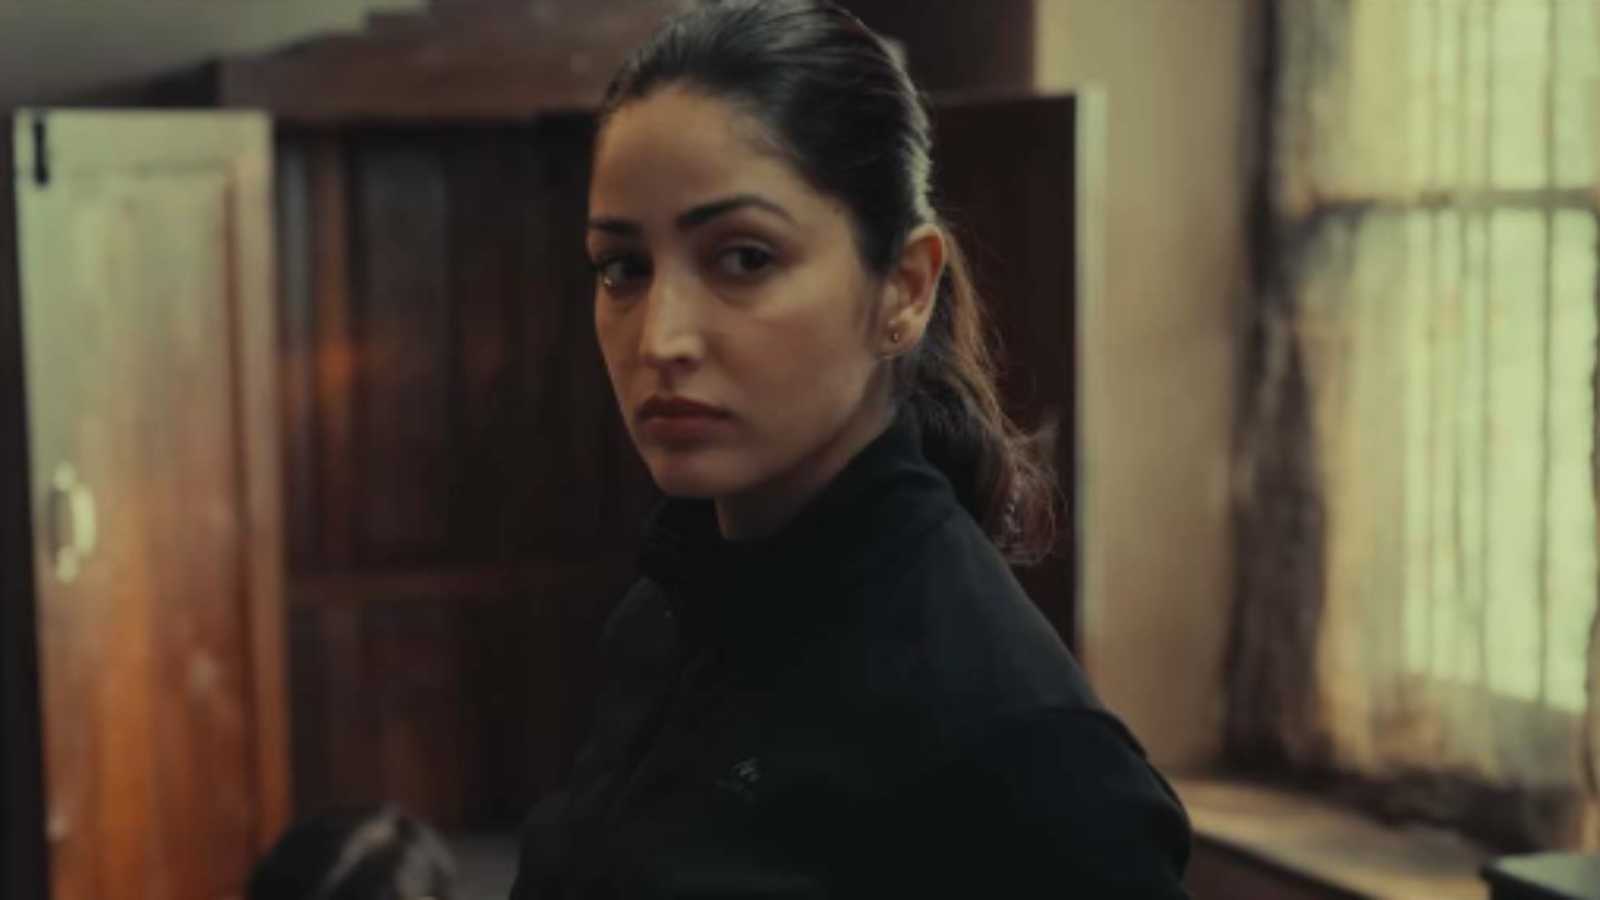 Article 370 Box Office Day 3: Yami Gautam's film is unstoppable, earns THIS much on its third day